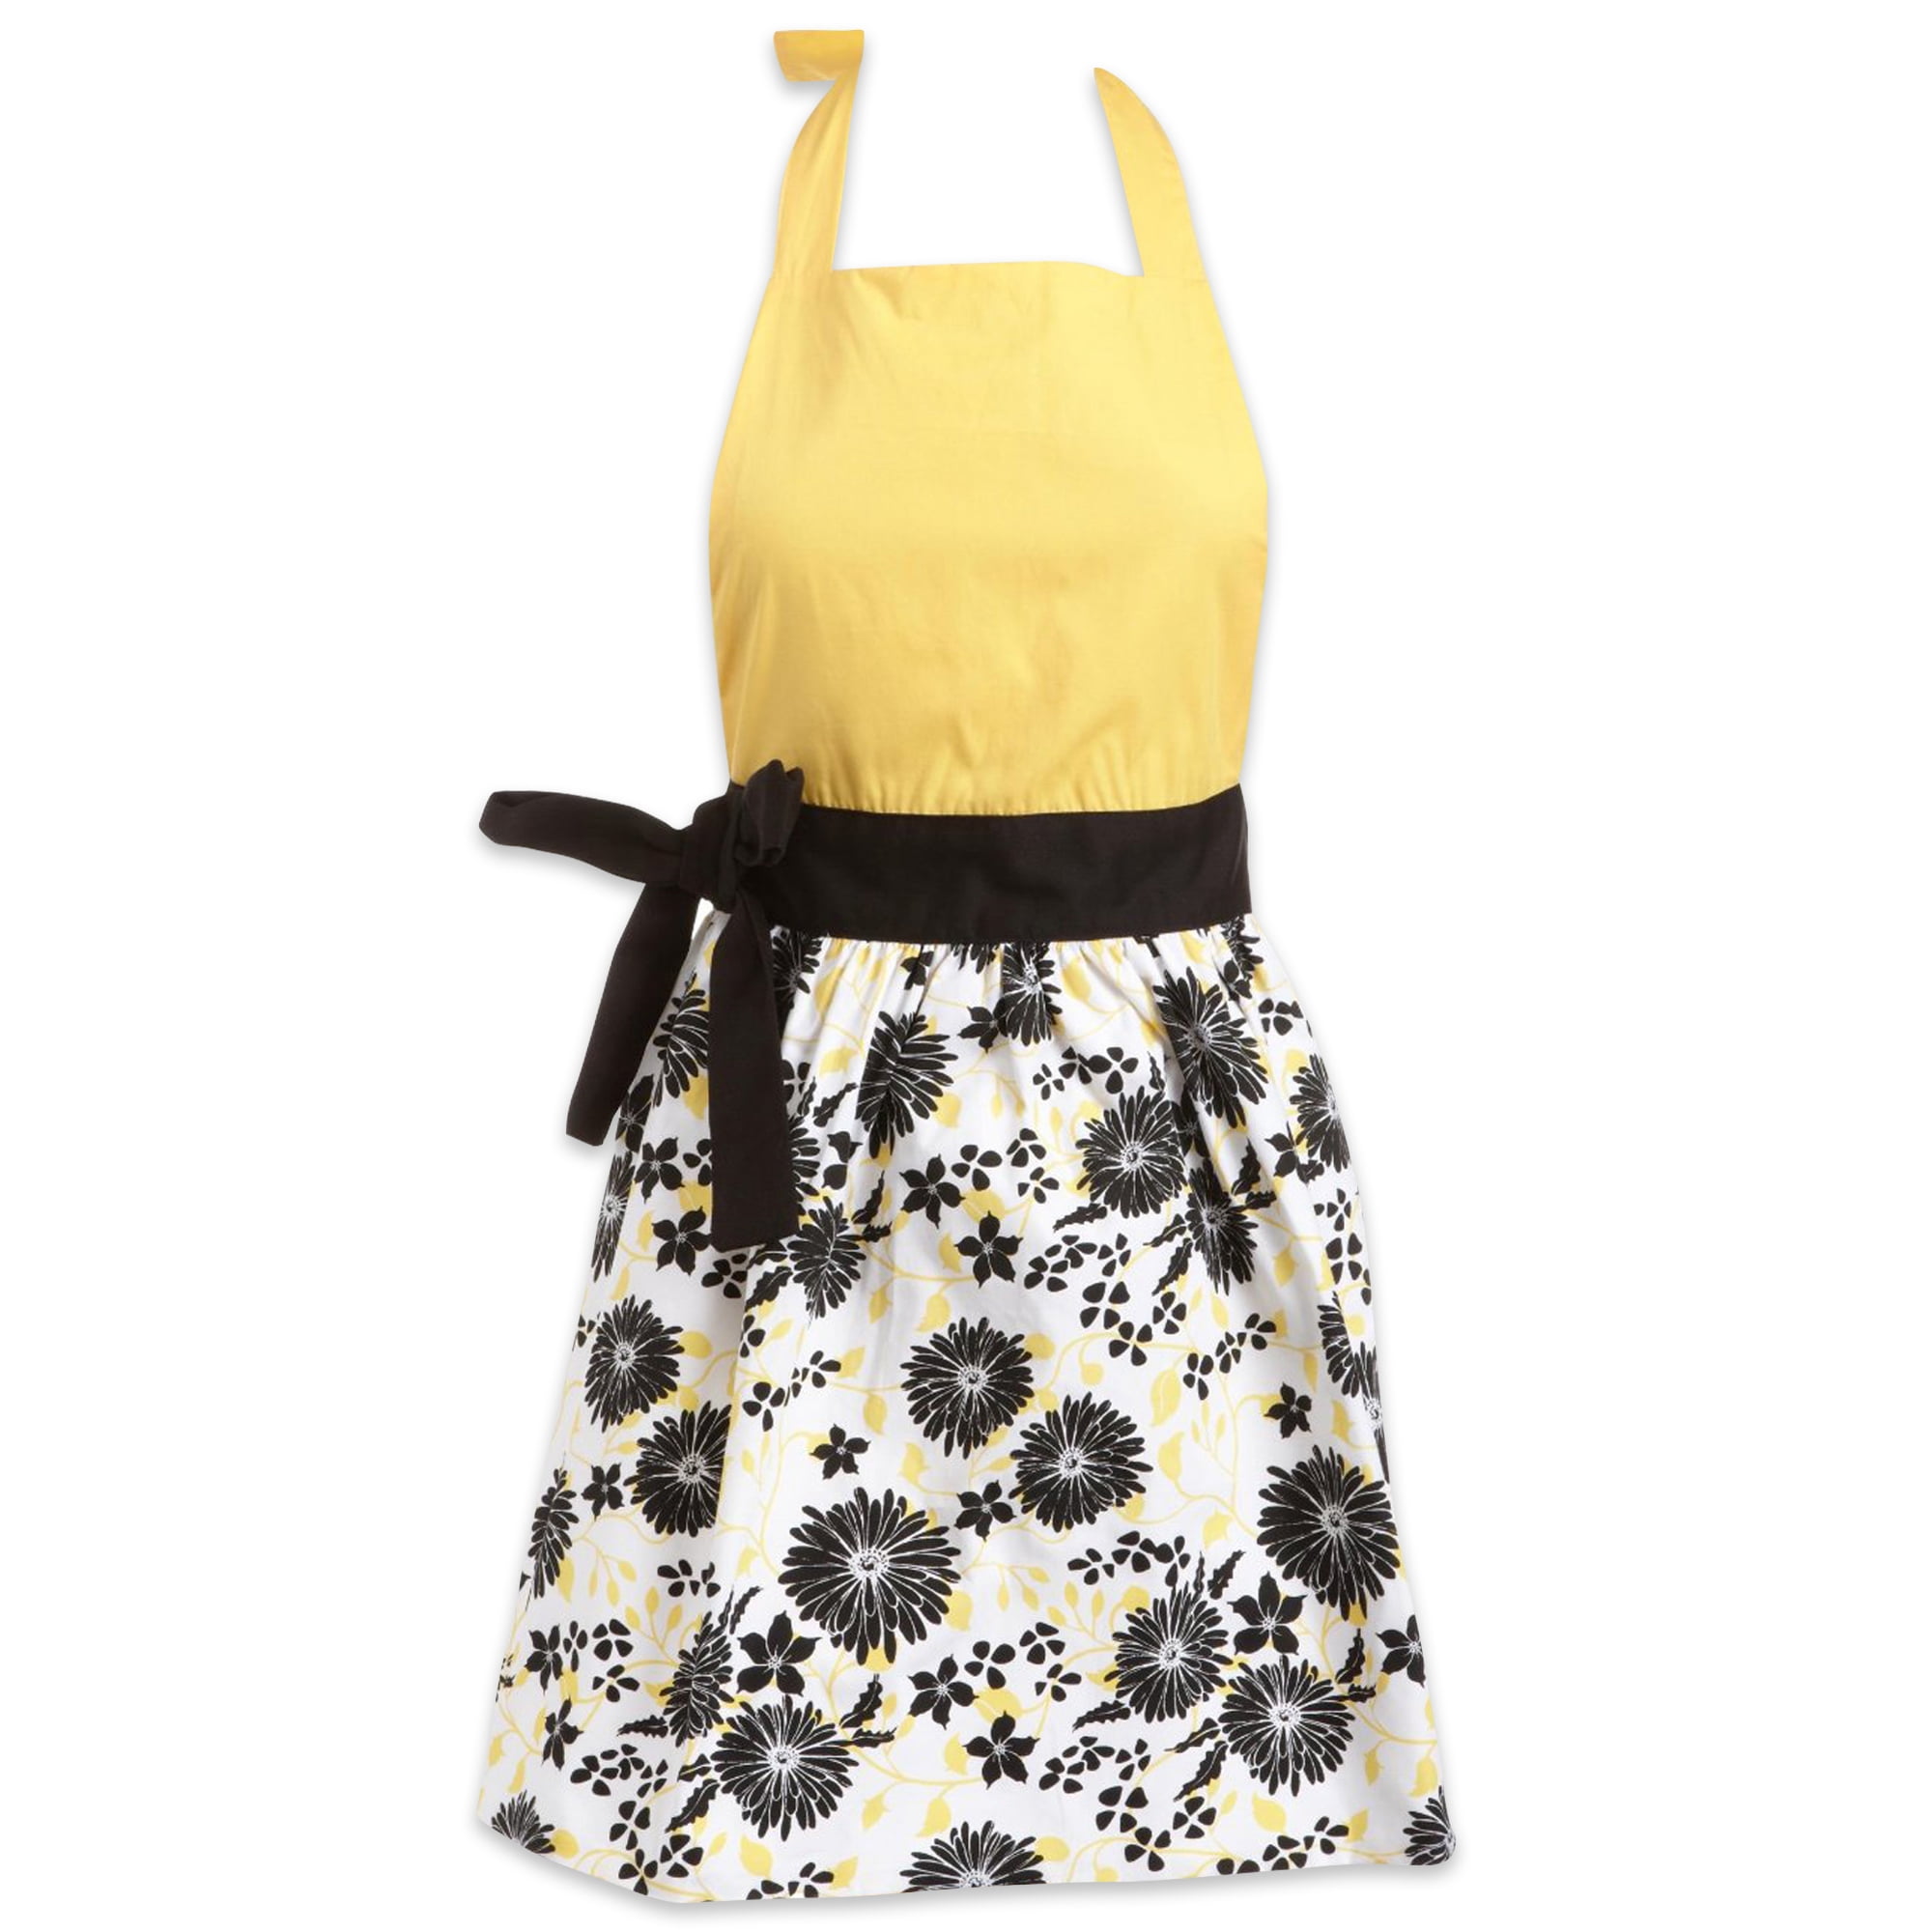 Apron Black and White Daisy Print attached towel FREE SHIPPING